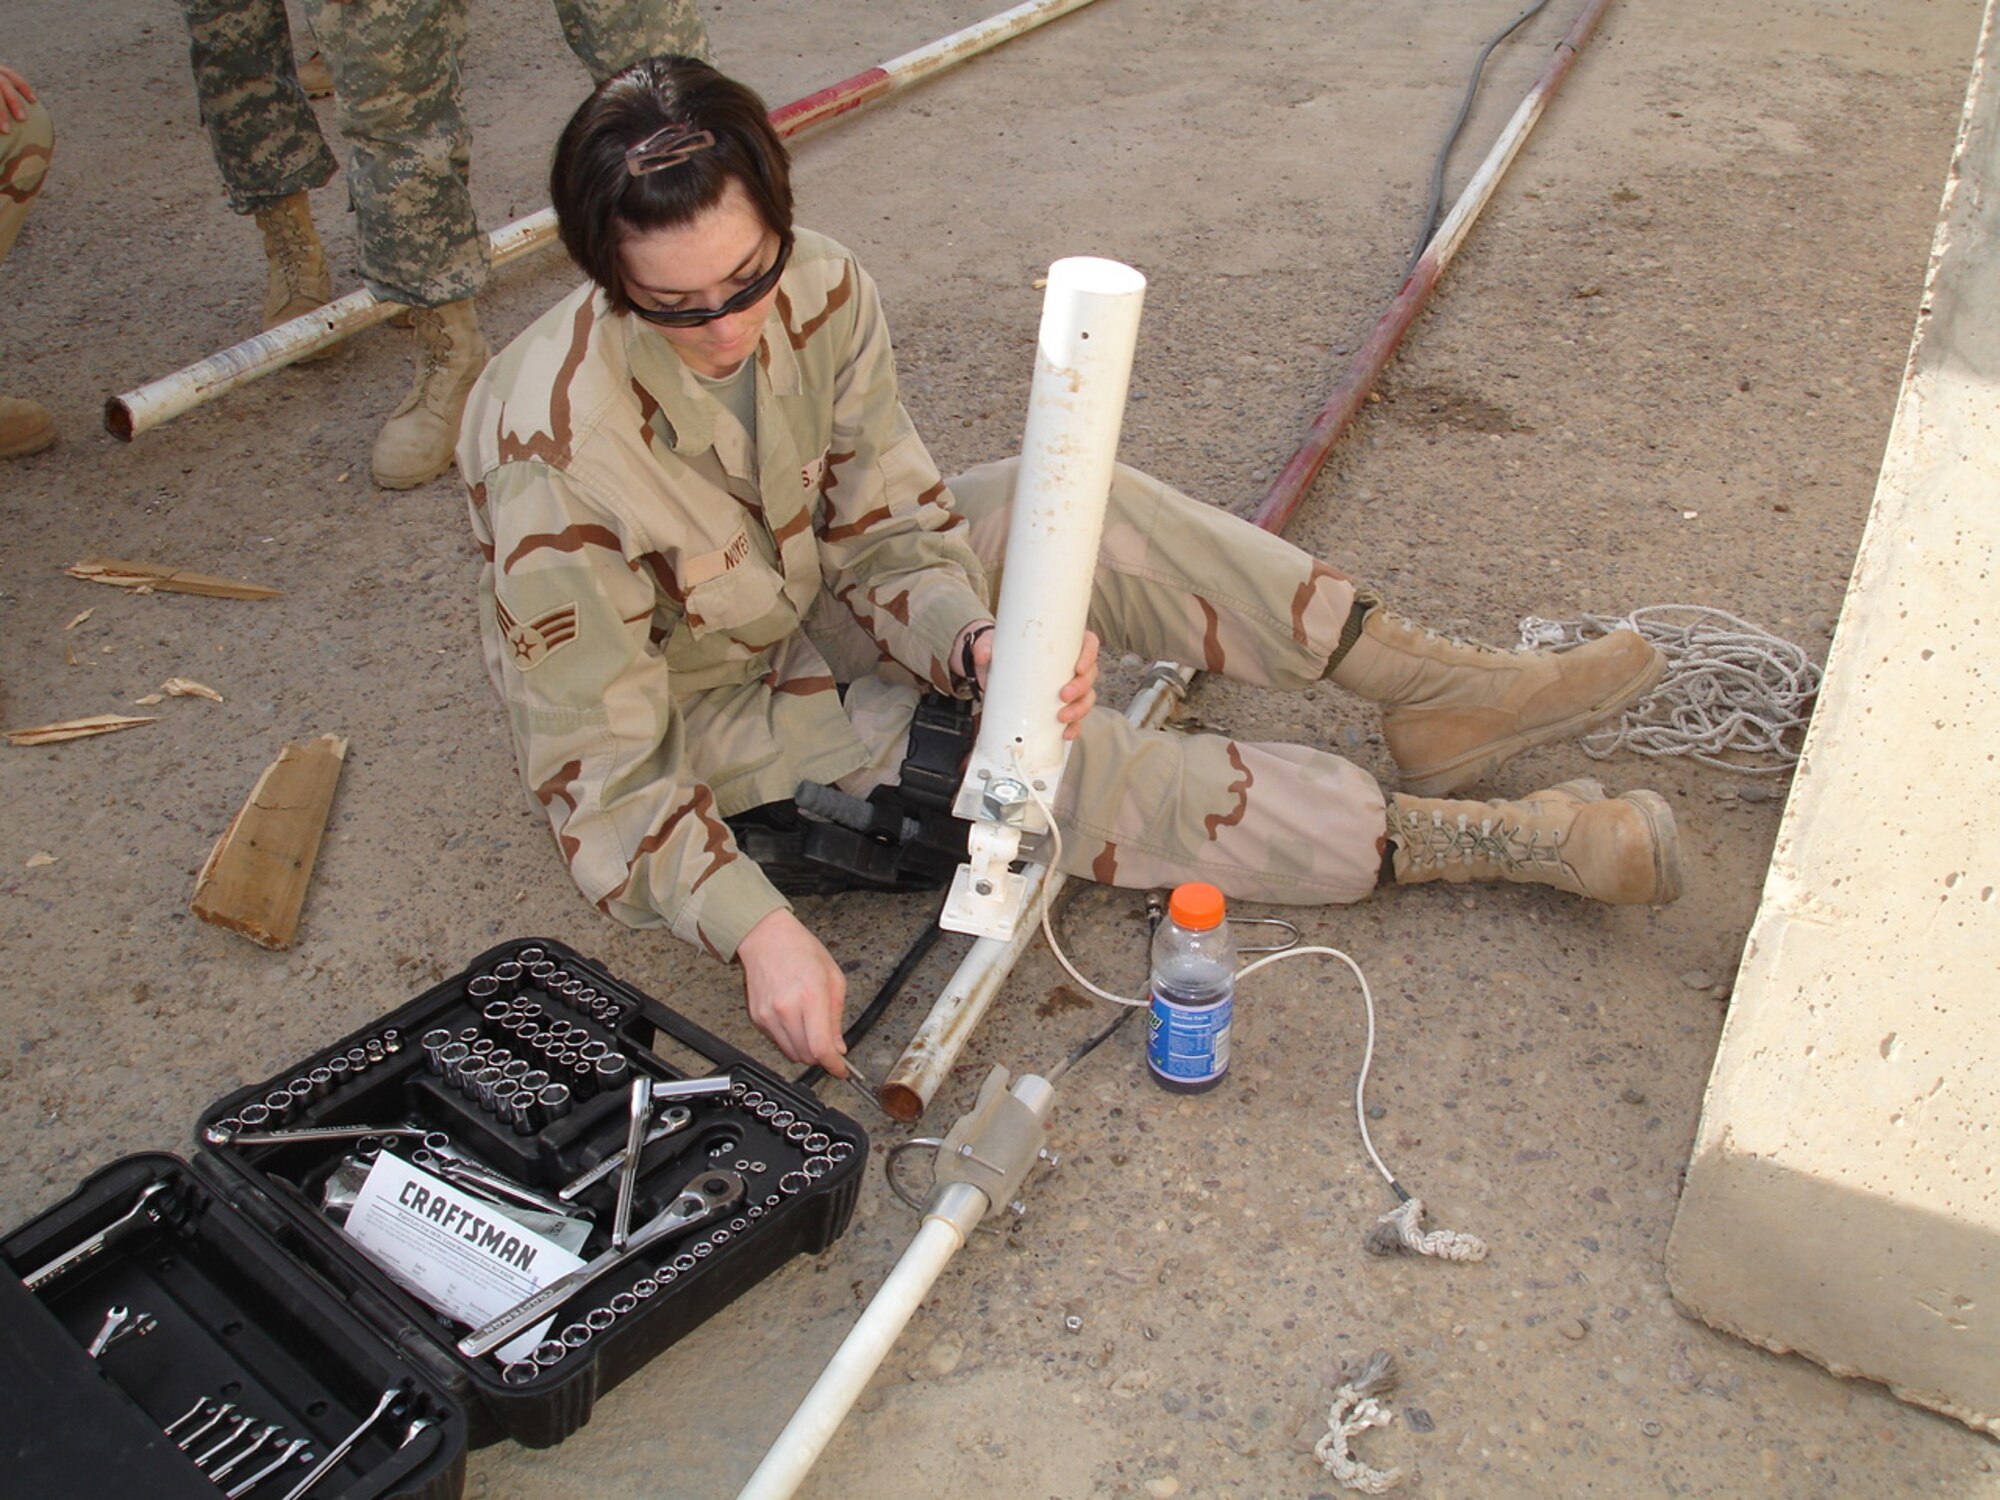 Senior Airman Jennifer Noyes, 1st Air and Space Communications Squadron, helps to construct a base and stand for a new 30-foot antenna. Airman Noyes was awarded the Defense Meritorious Service Medal for her accomplishments during a 365-day deployment to Baghdad. (Courtesy photo)